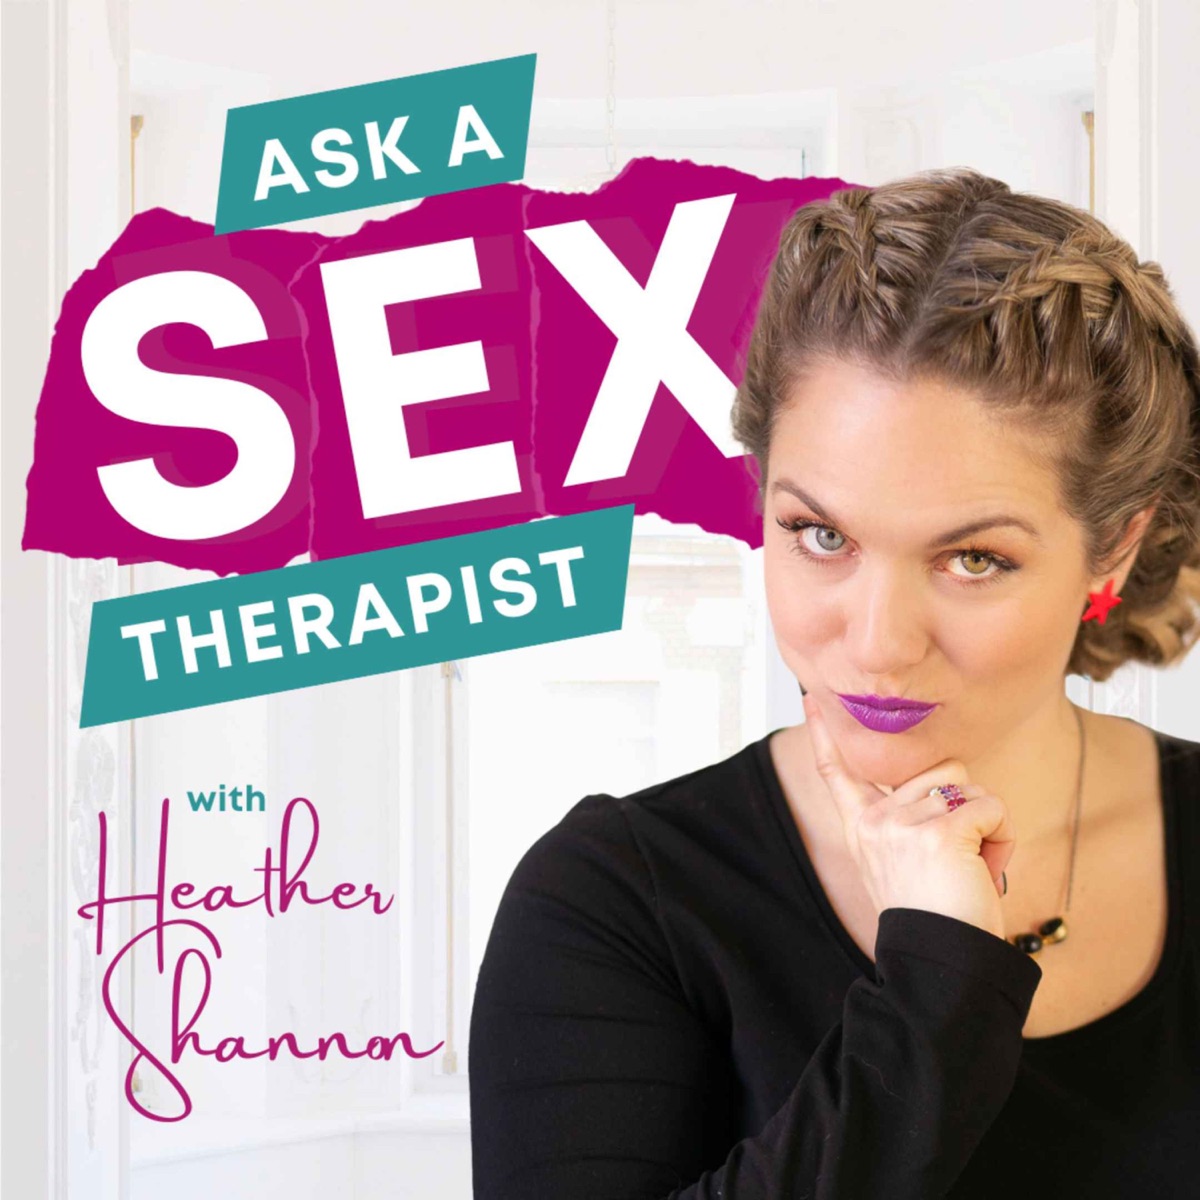 Ask A Sex Therapist with Heather Shannon – Podcast